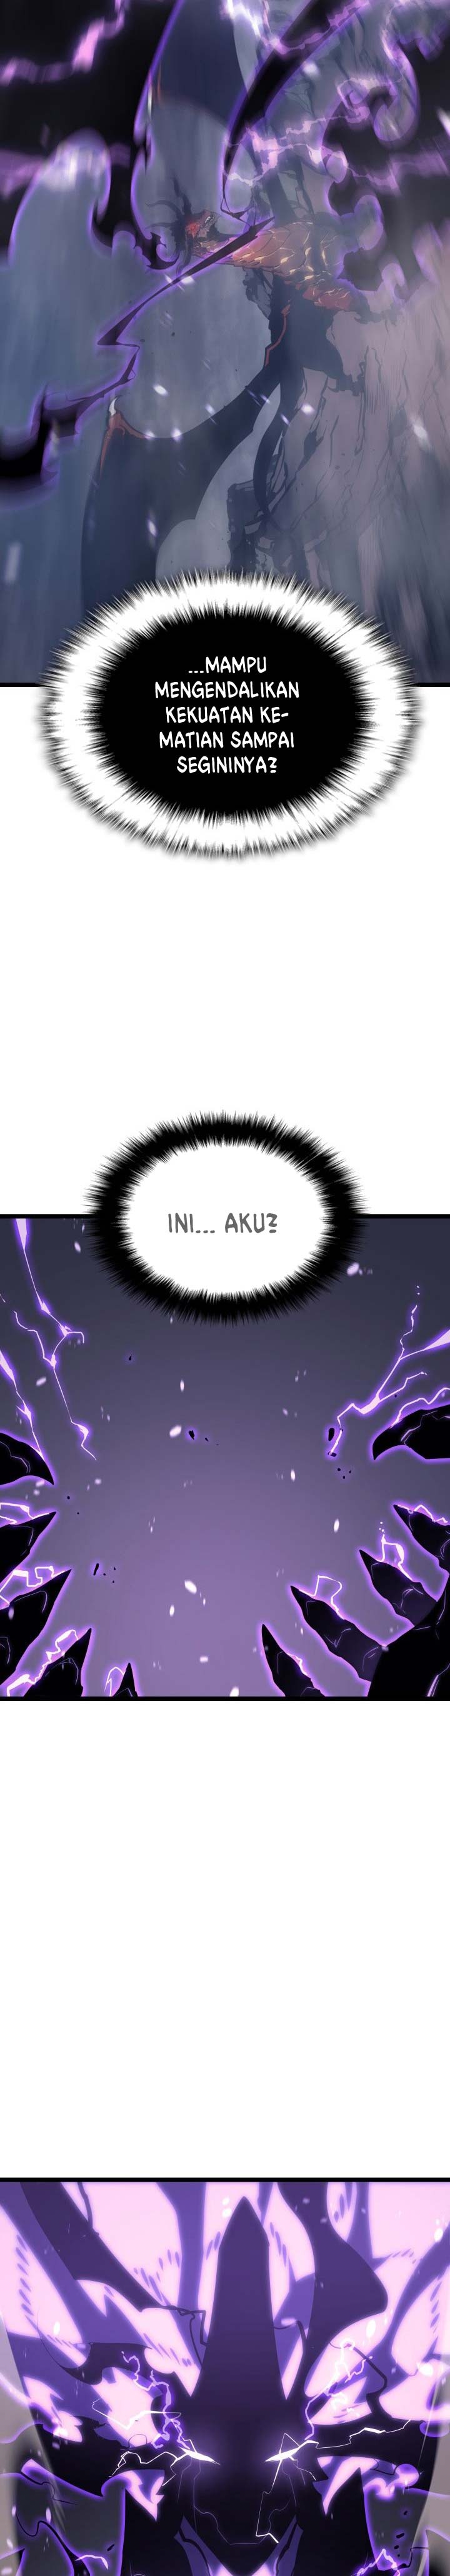 Solo Leveling Chapter 175